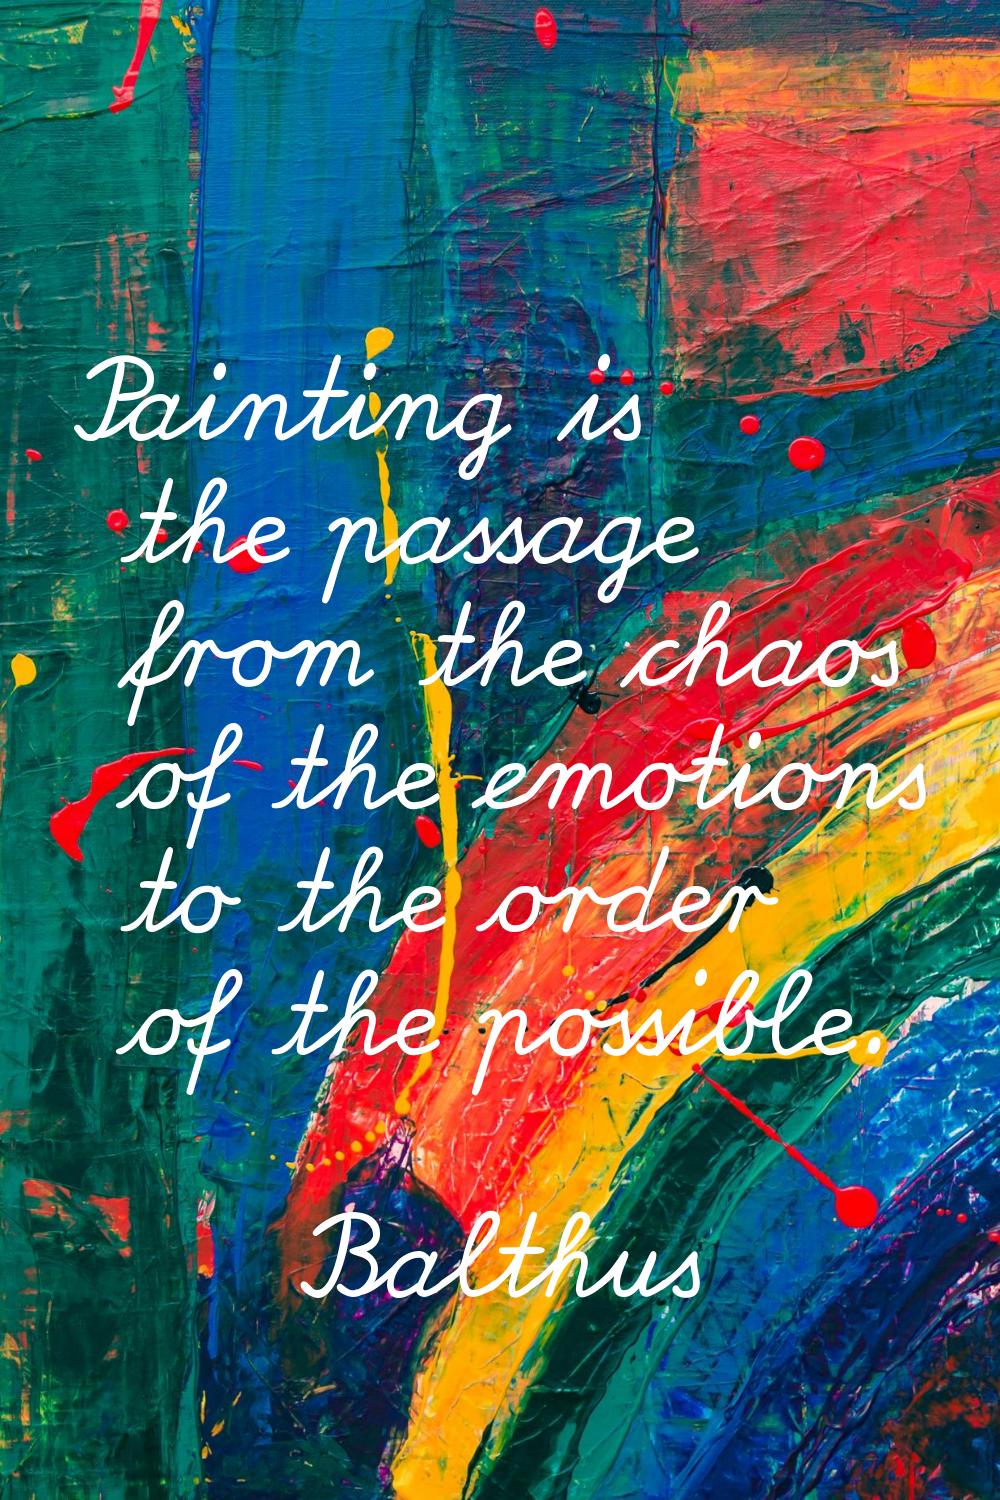 Painting is the passage from the chaos of the emotions to the order of the possible.